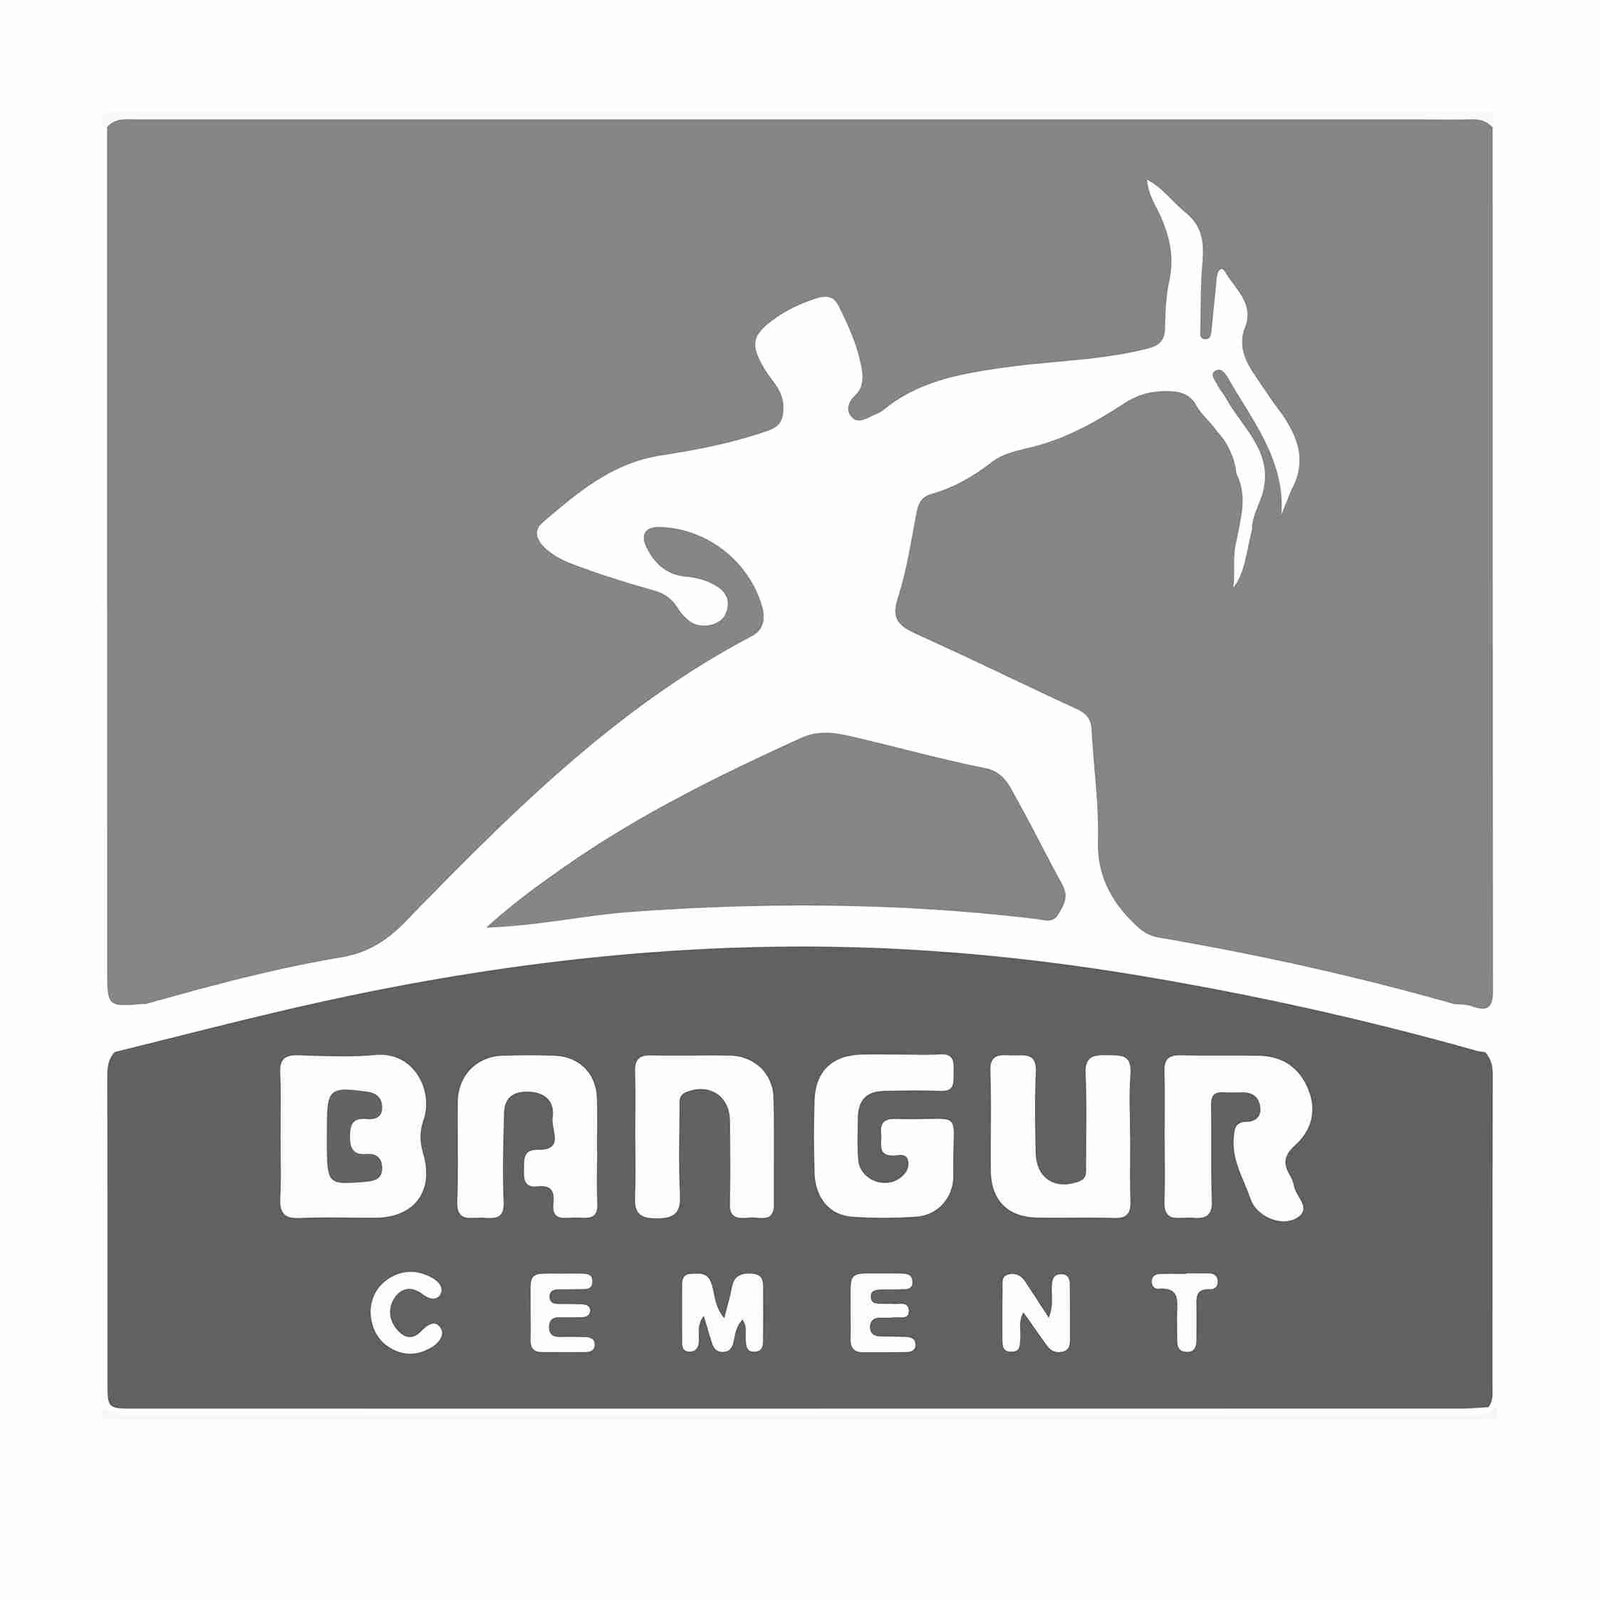 Shree Cement announces a new brand identity with 'Bangur' as the master  brand